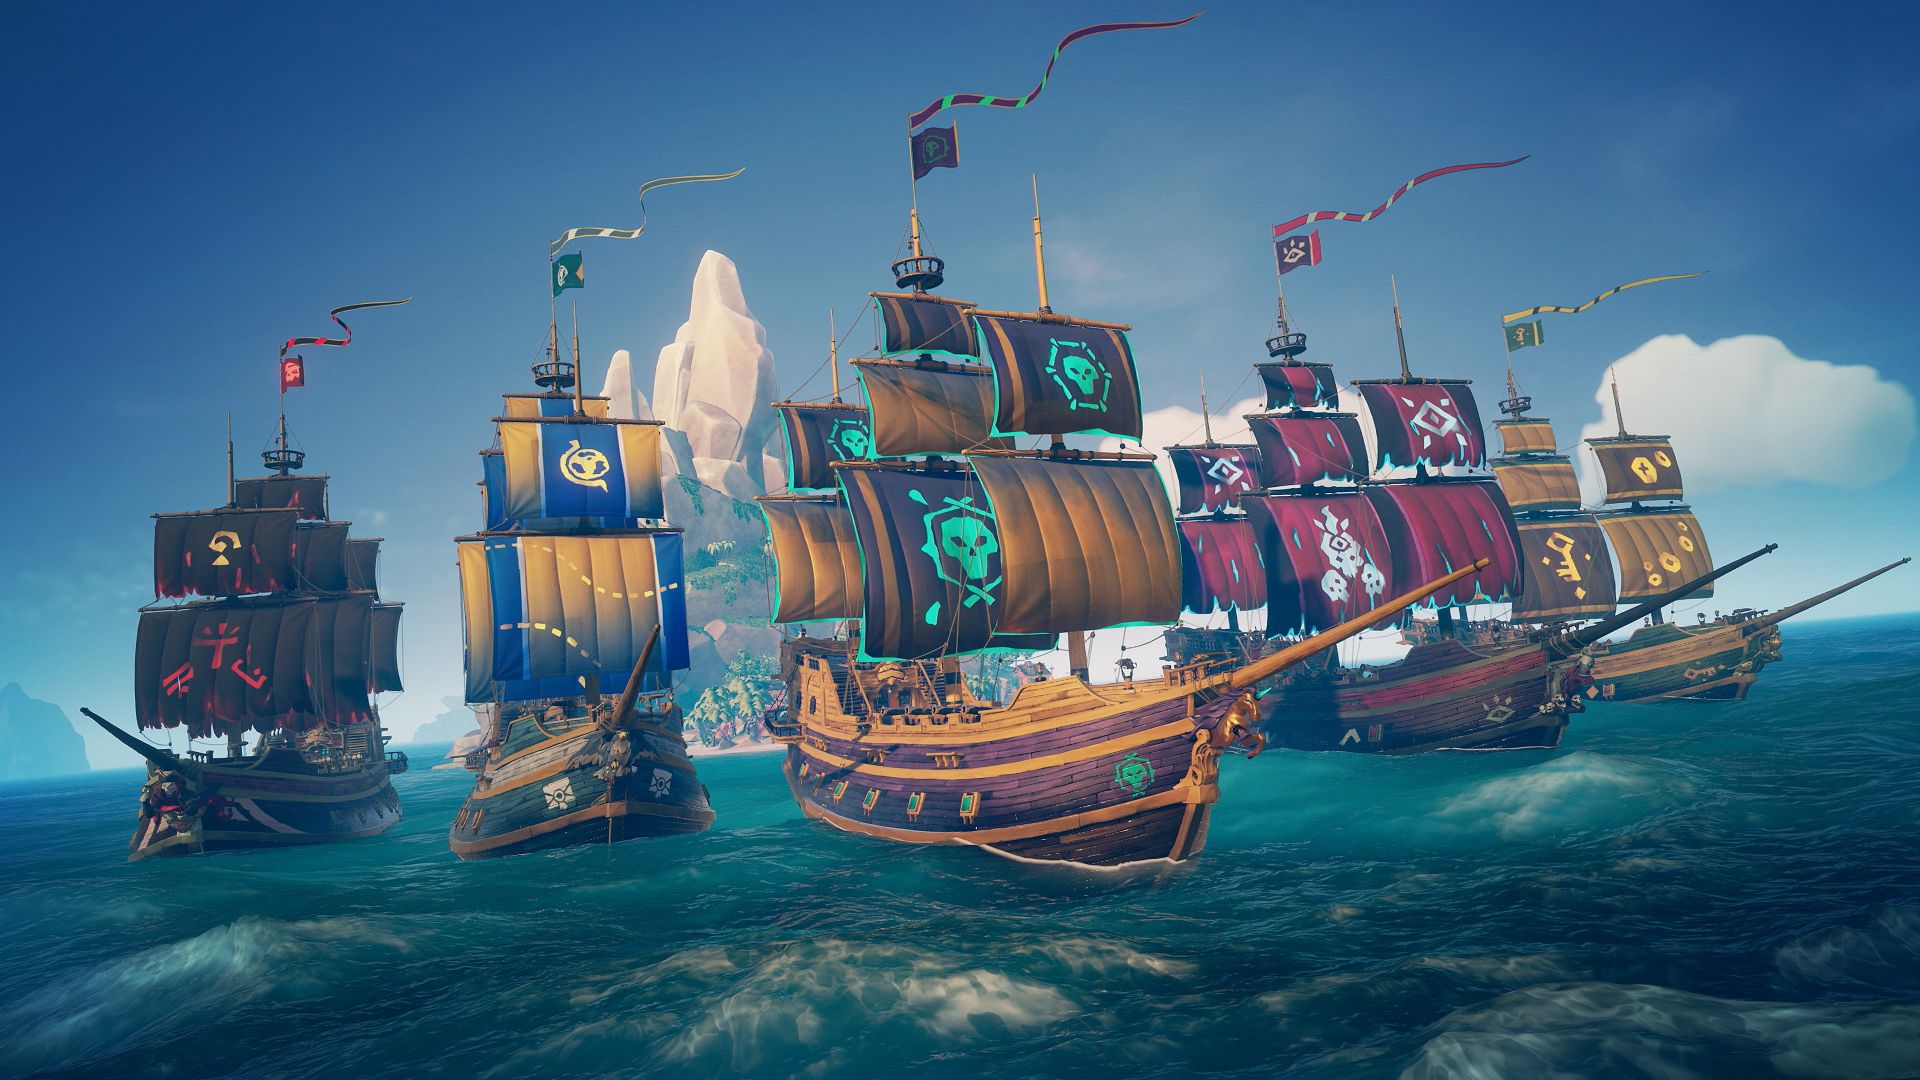 Sea of Thieves Coming to PS5 is “a Huge Moment” for the Game – Rare